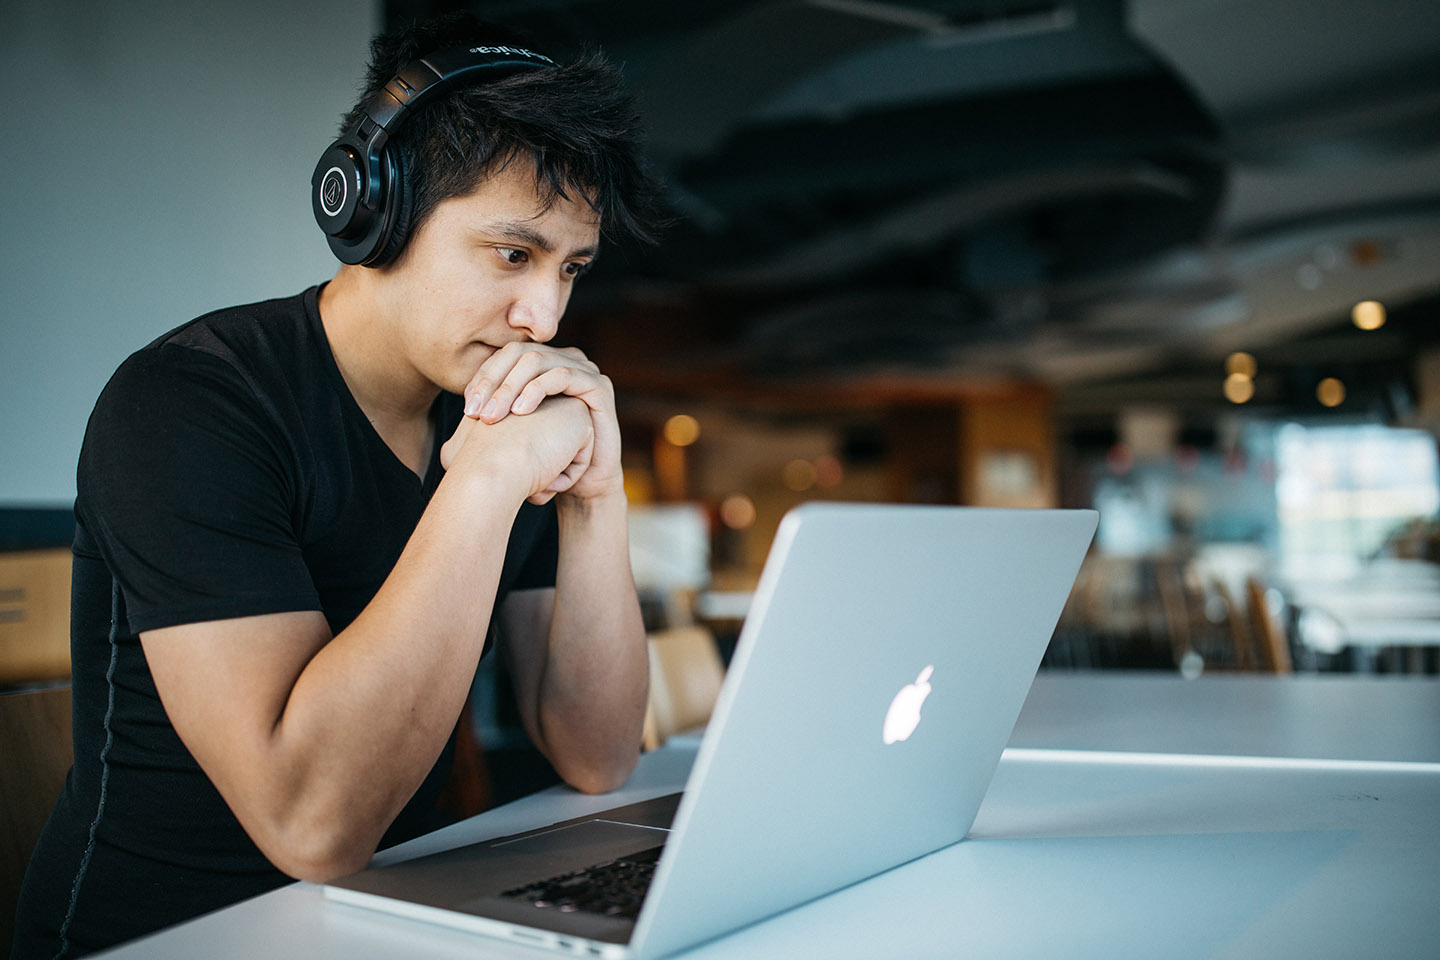 Man wearing headphones while sitting on chair in front of MacBook, Wes Hicks, Unsplash